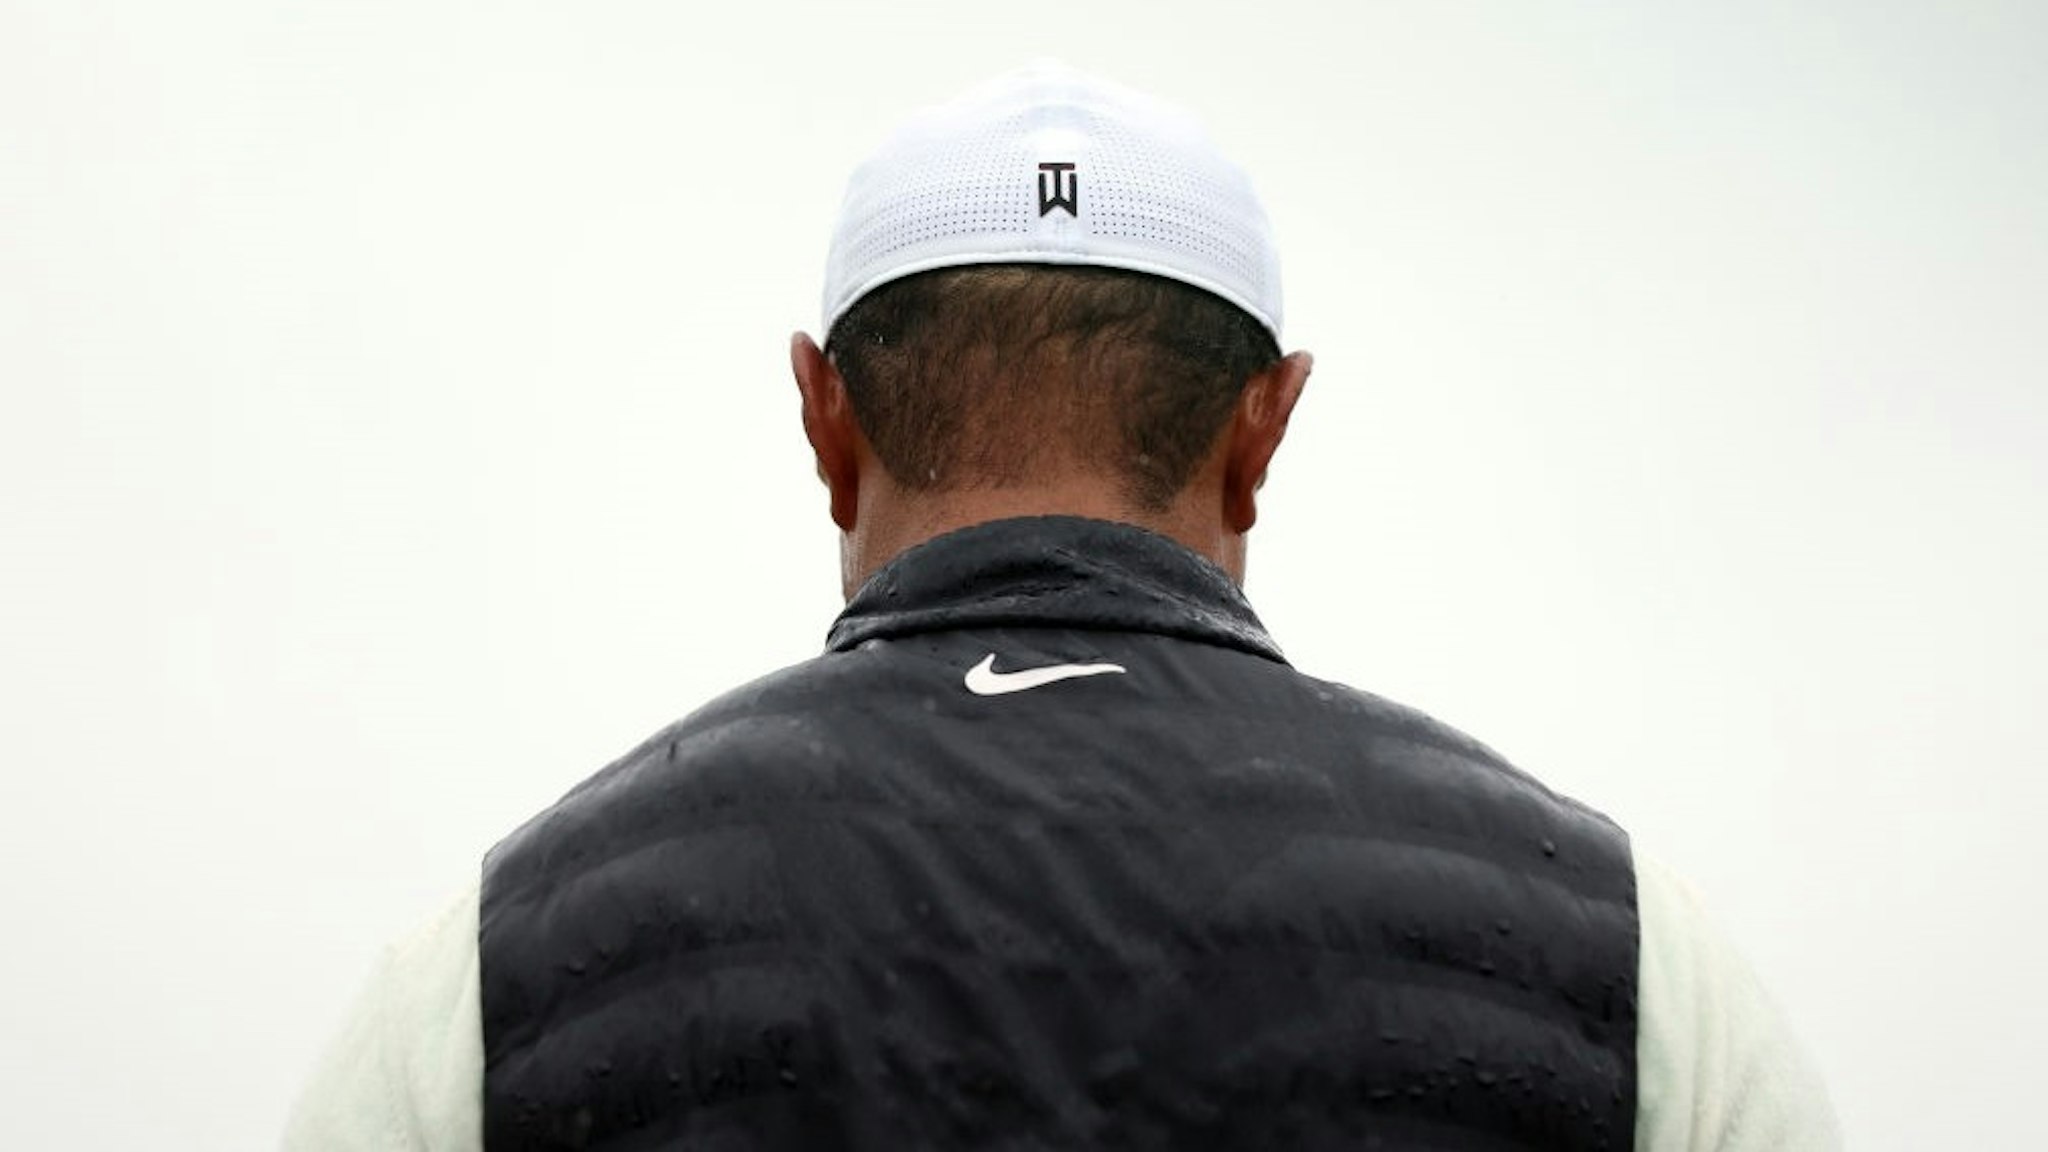 AUGUSTA, GEORGIA - APRIL 08: Tiger Woods of the United States looks on from the 18th green during the continuation of the weather delayed second round of the 2023 Masters Tournament at Augusta National Golf Club on April 08, 2023 in Augusta, Georgia. (Photo by